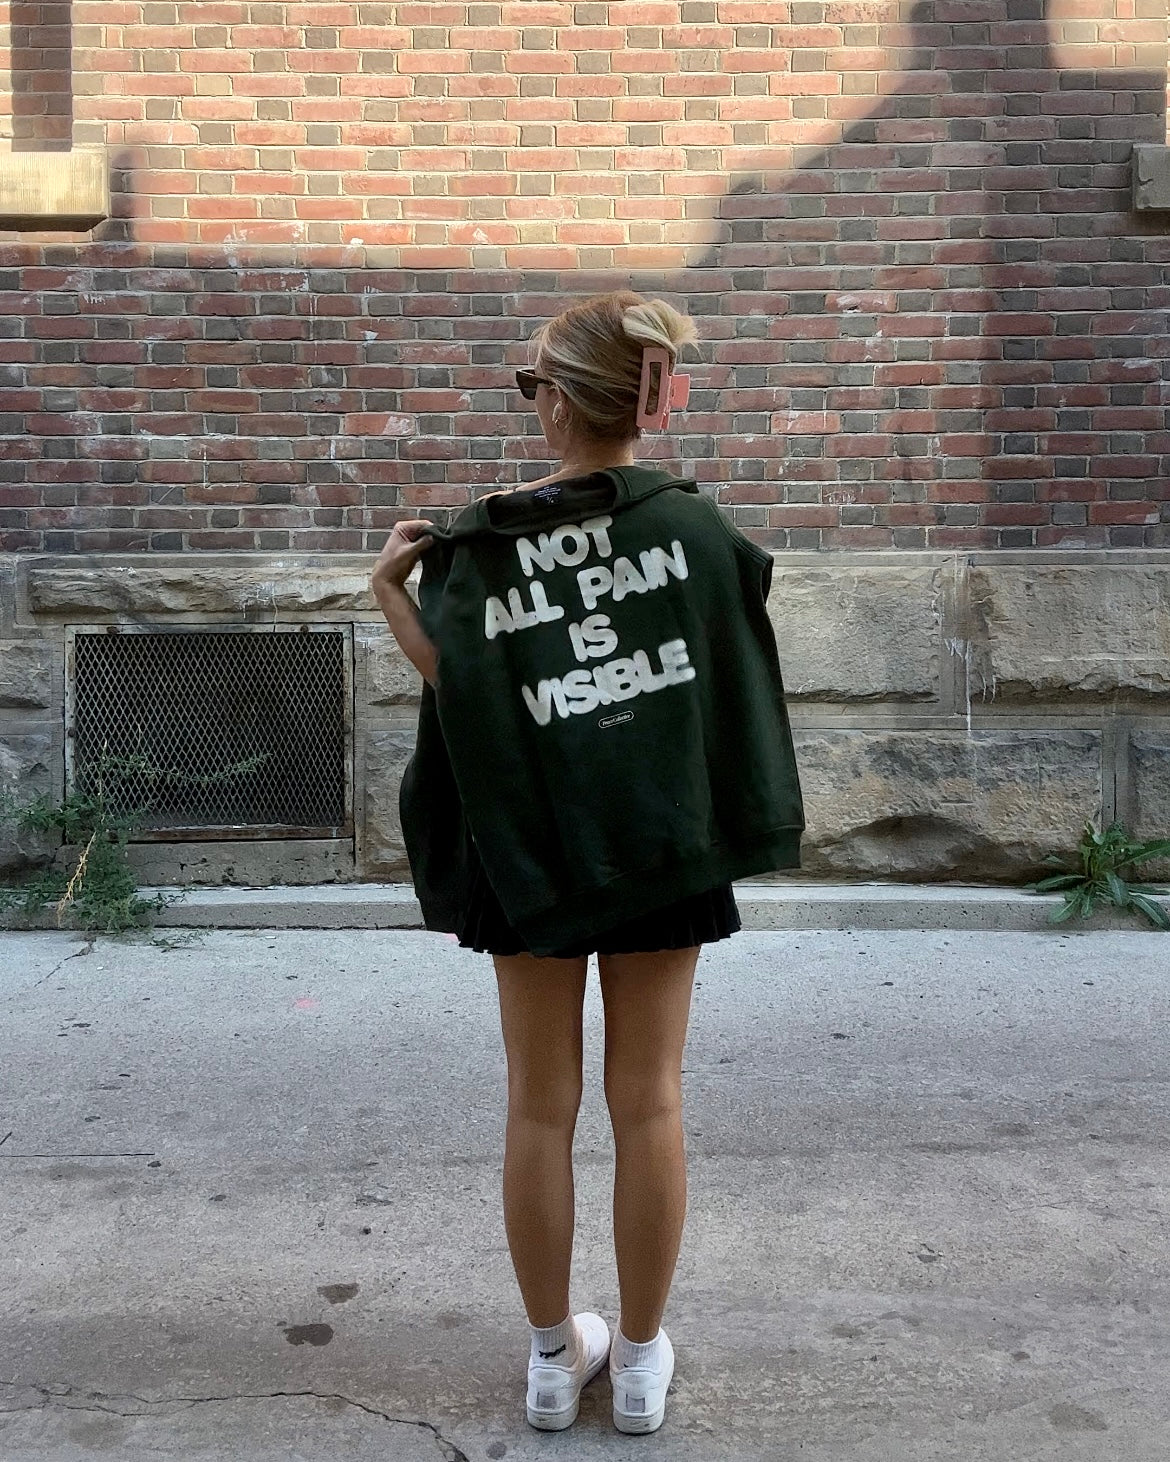 Not all pain is visible Crewneck - Forest Green